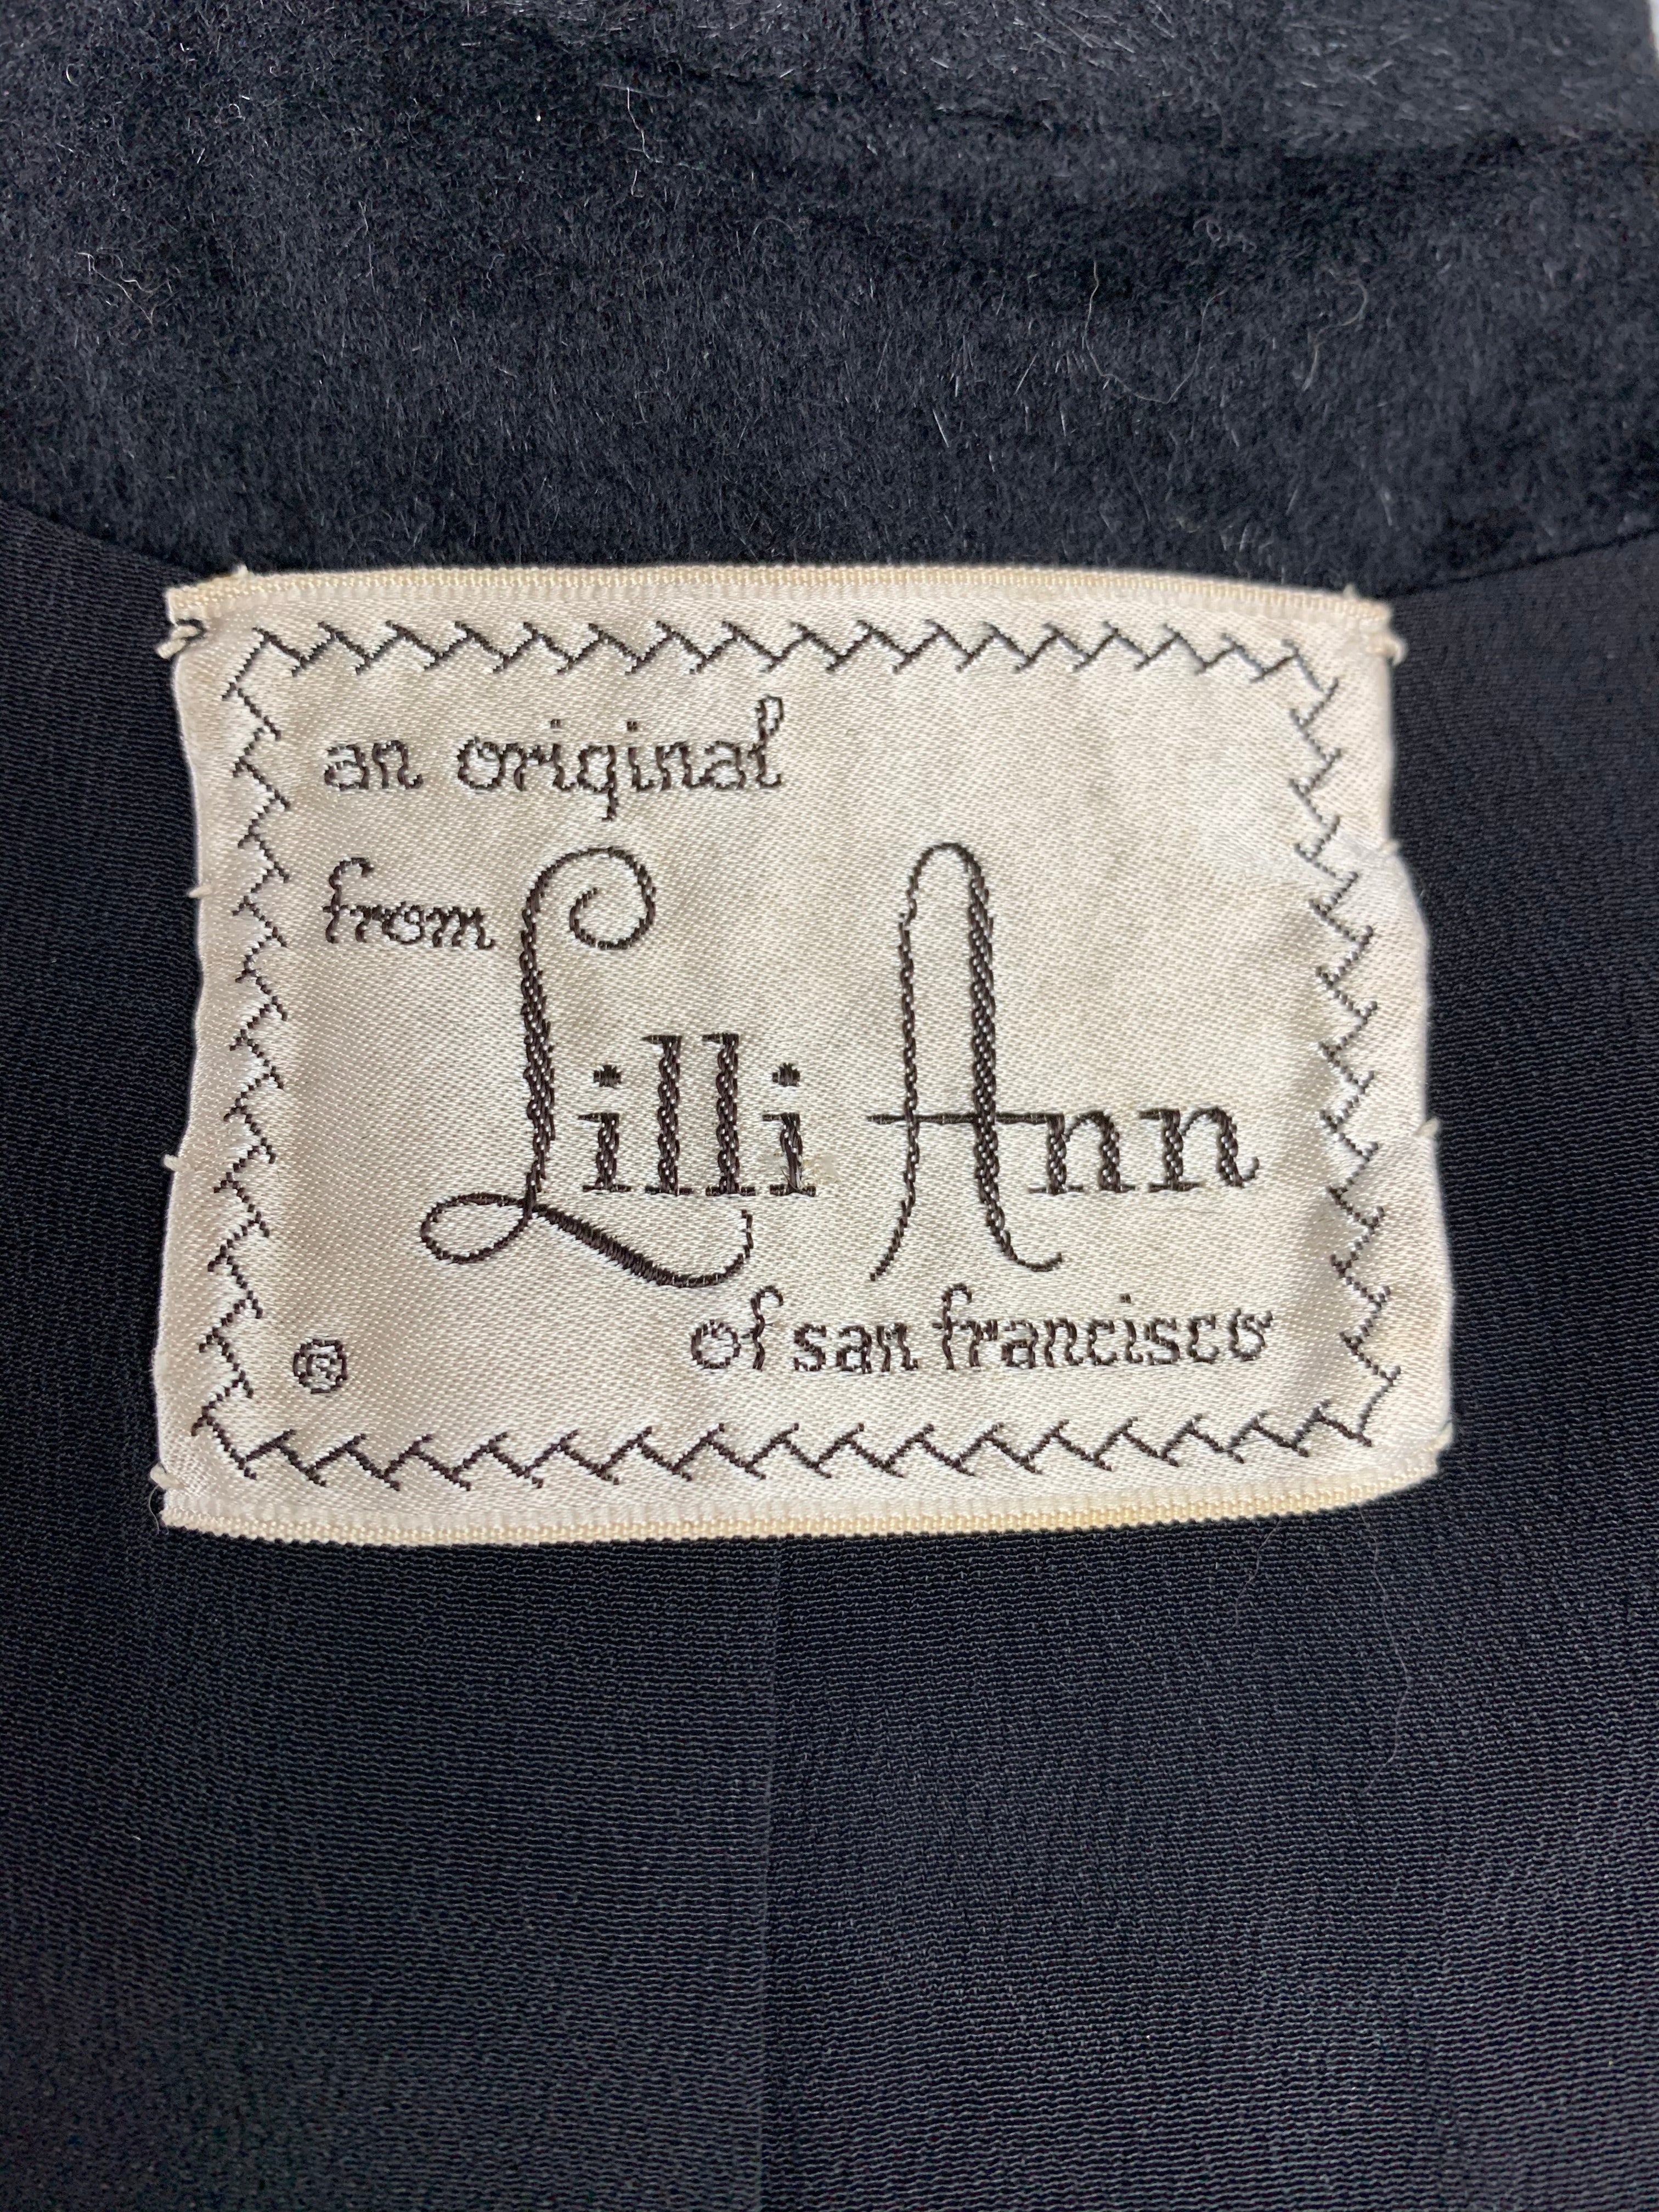 1950s Lilli Ann Fringed Black Wool Mohair Jacket Size S